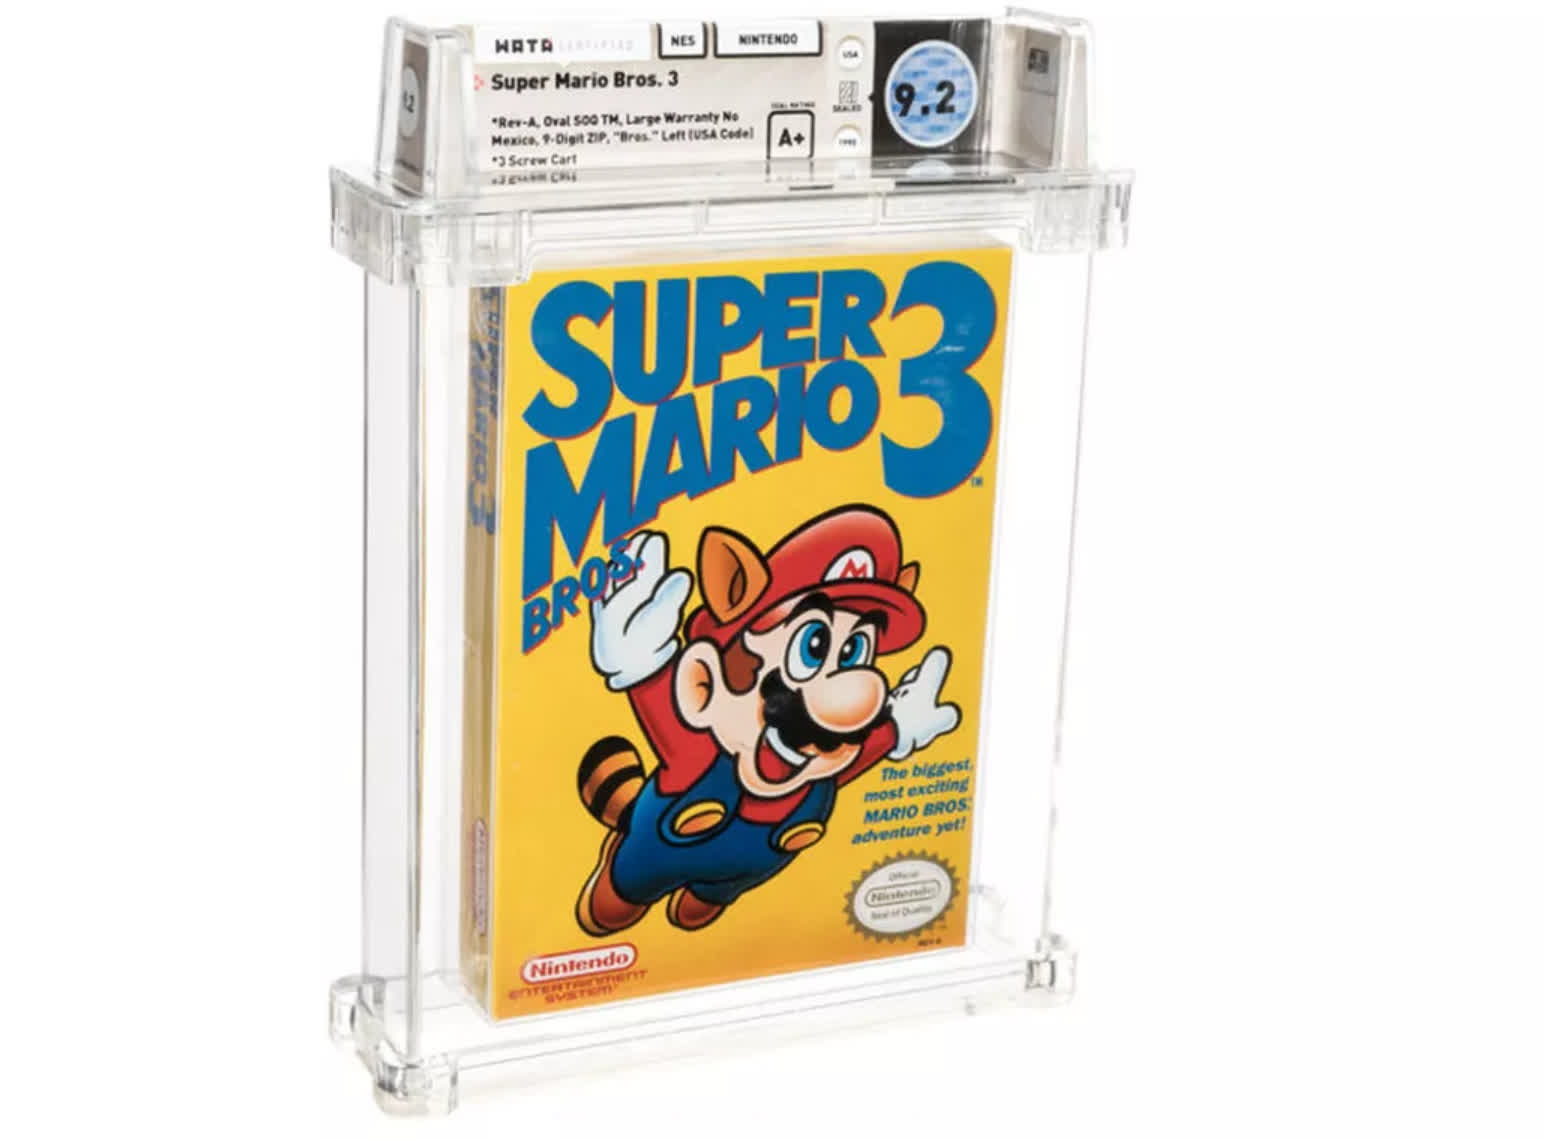 Another Super Mario NES title becomes the world's most expensive video game